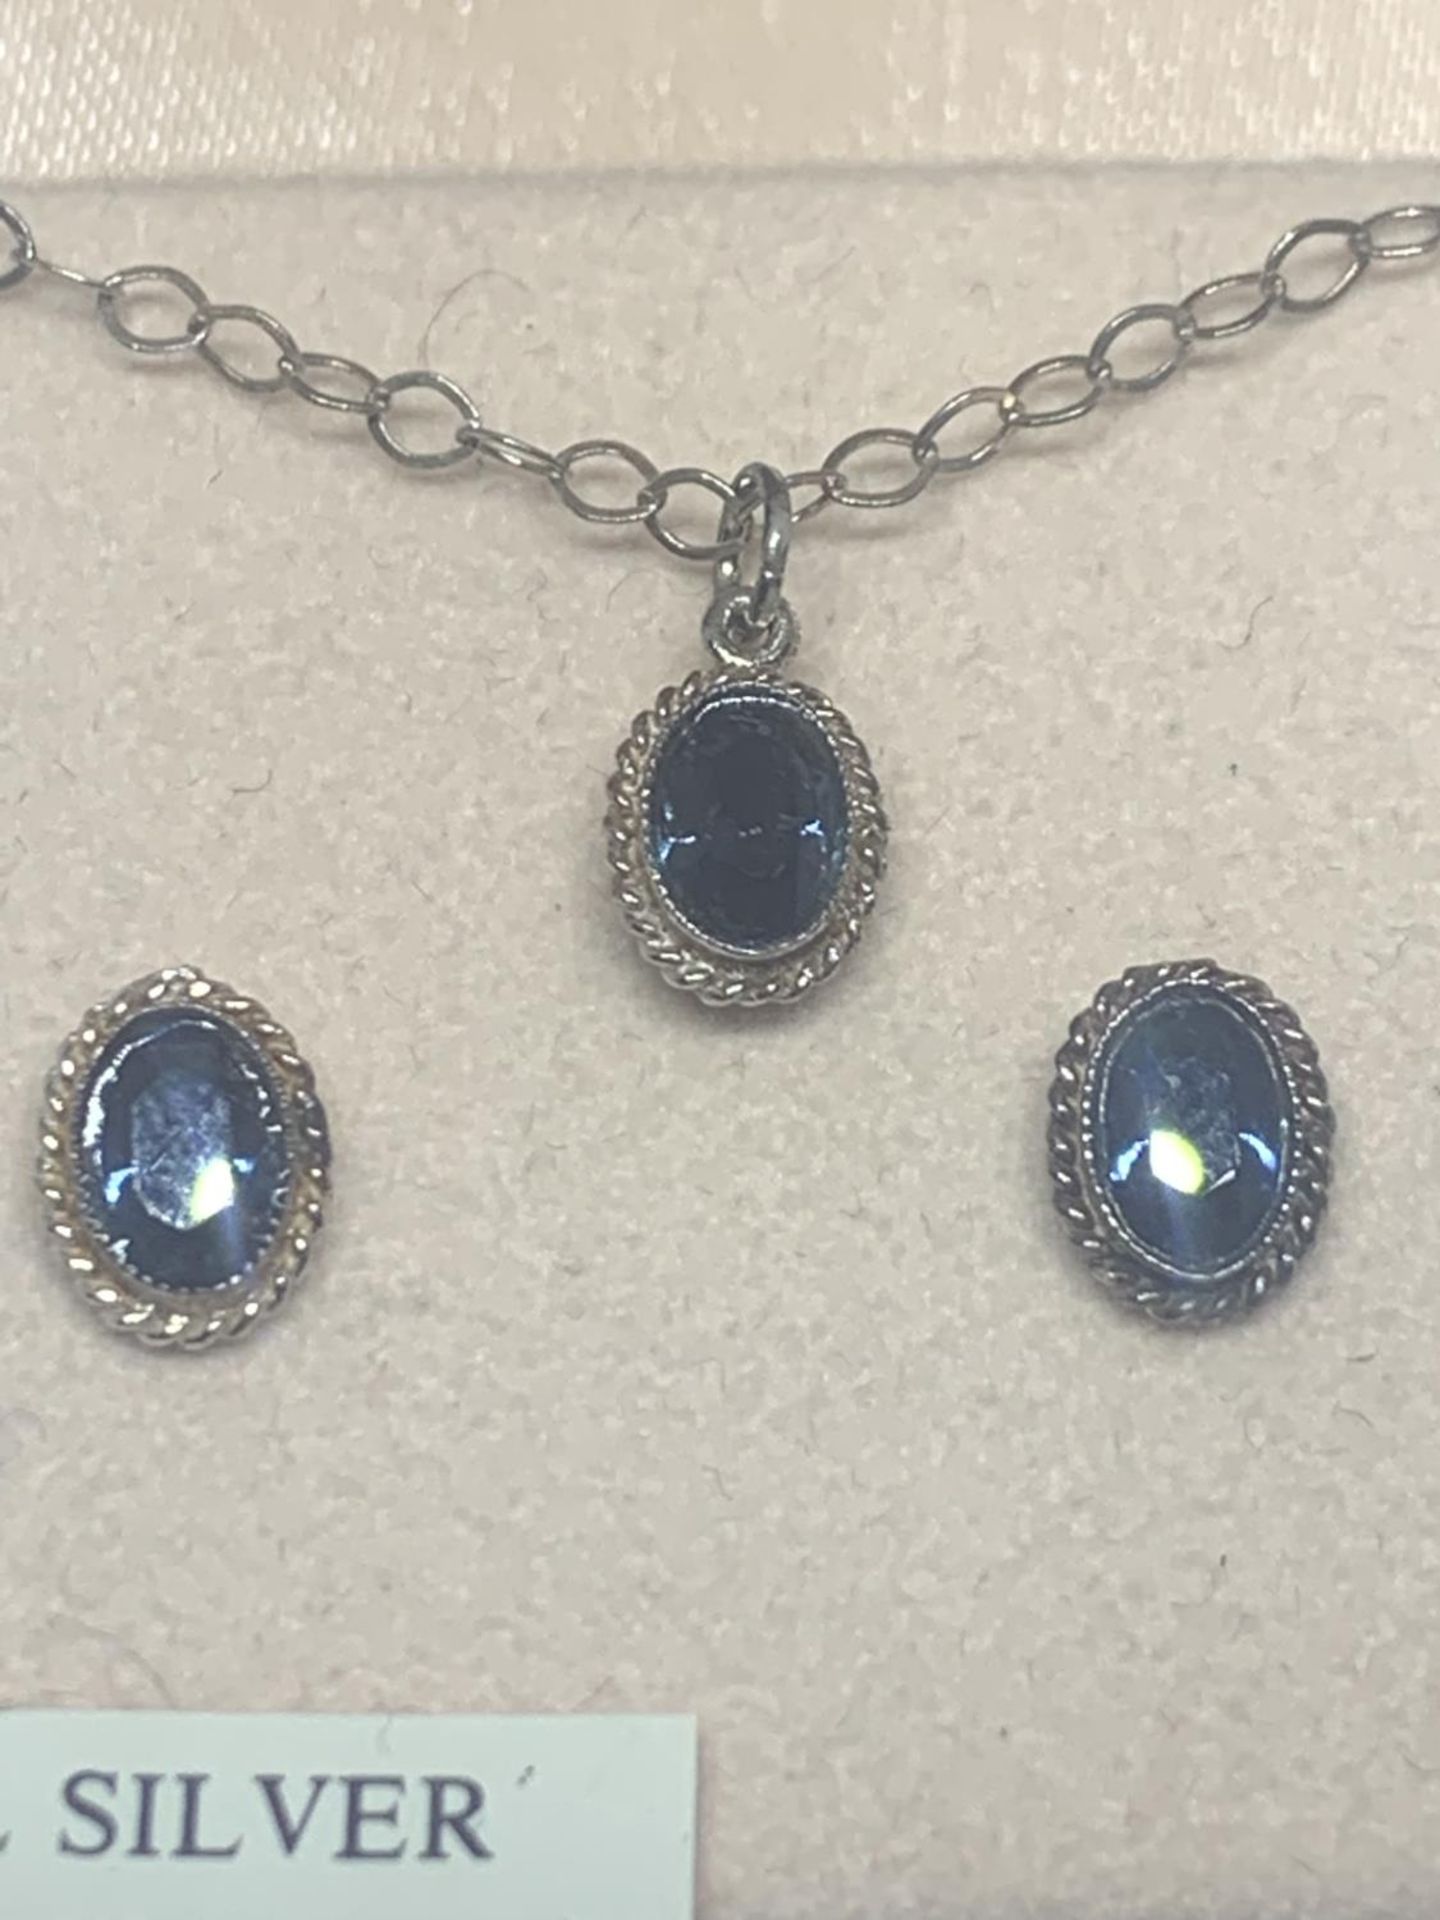 A BOXED SILVER NECKLACE AND EARRING SET WITH BLUE STONES SURROUNDED BY CLEAR STONE CHIPS - Image 2 of 2